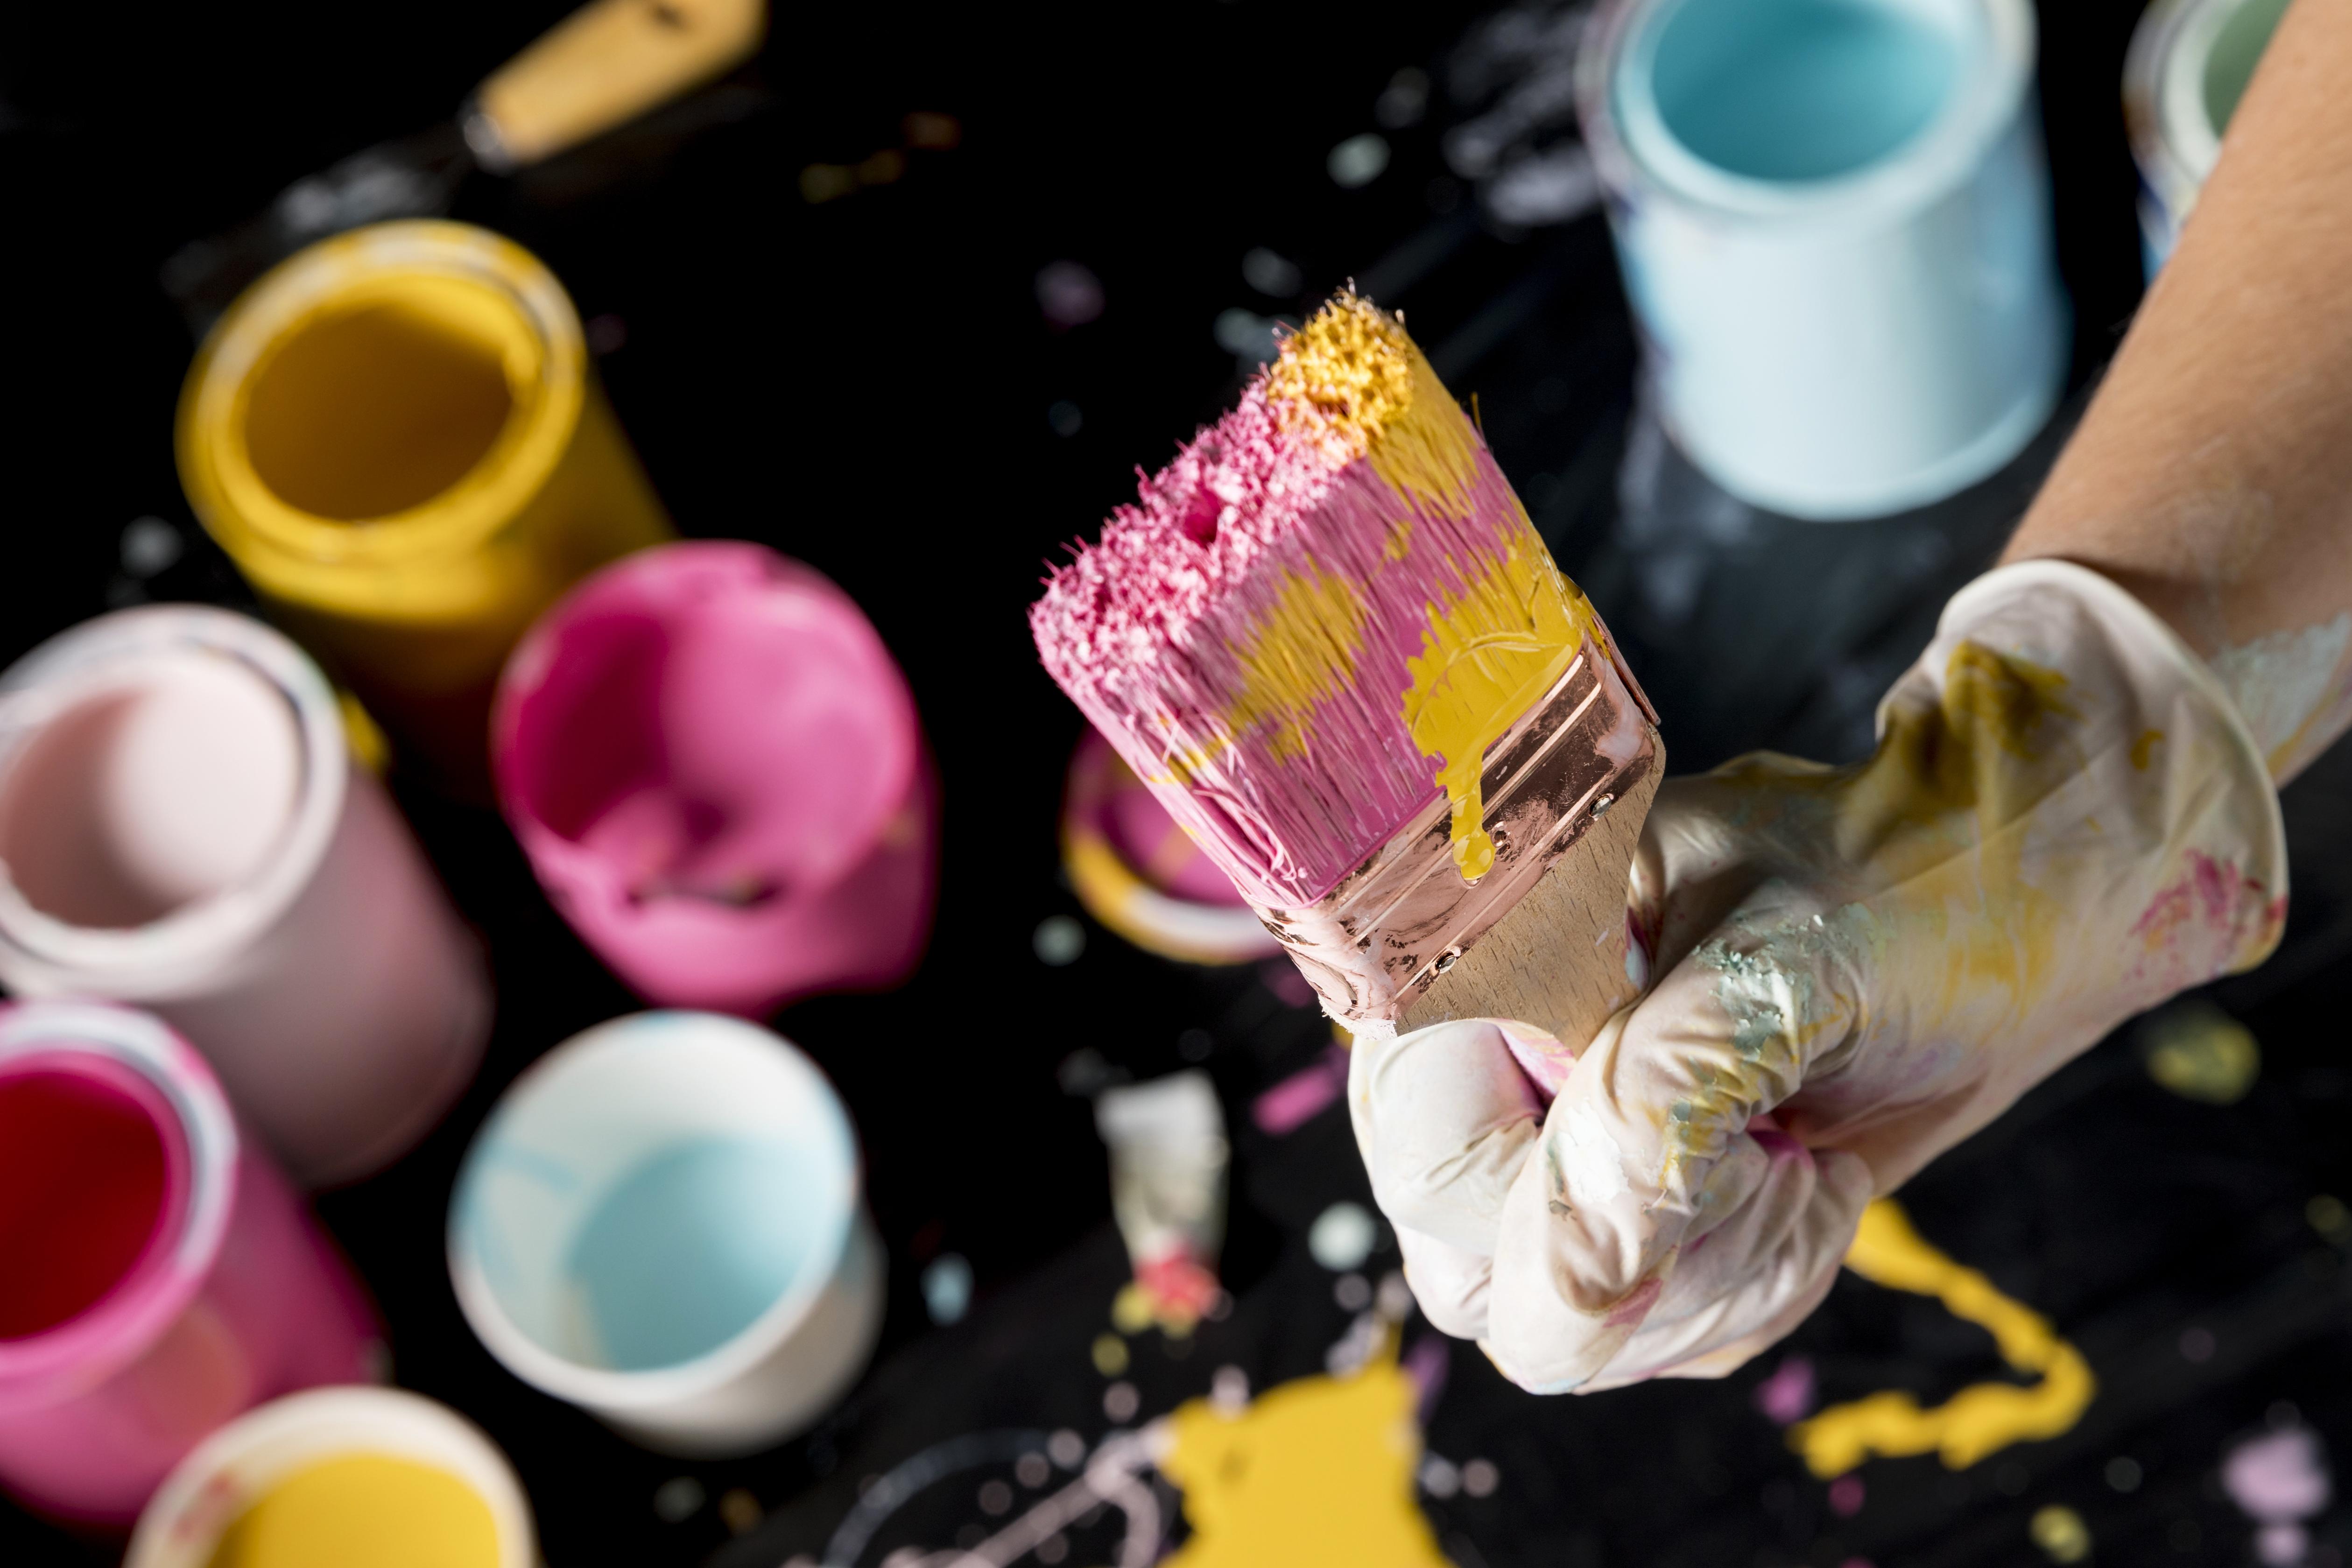 More and more paint businesses are entering the construction chemicals segment in India in 2023